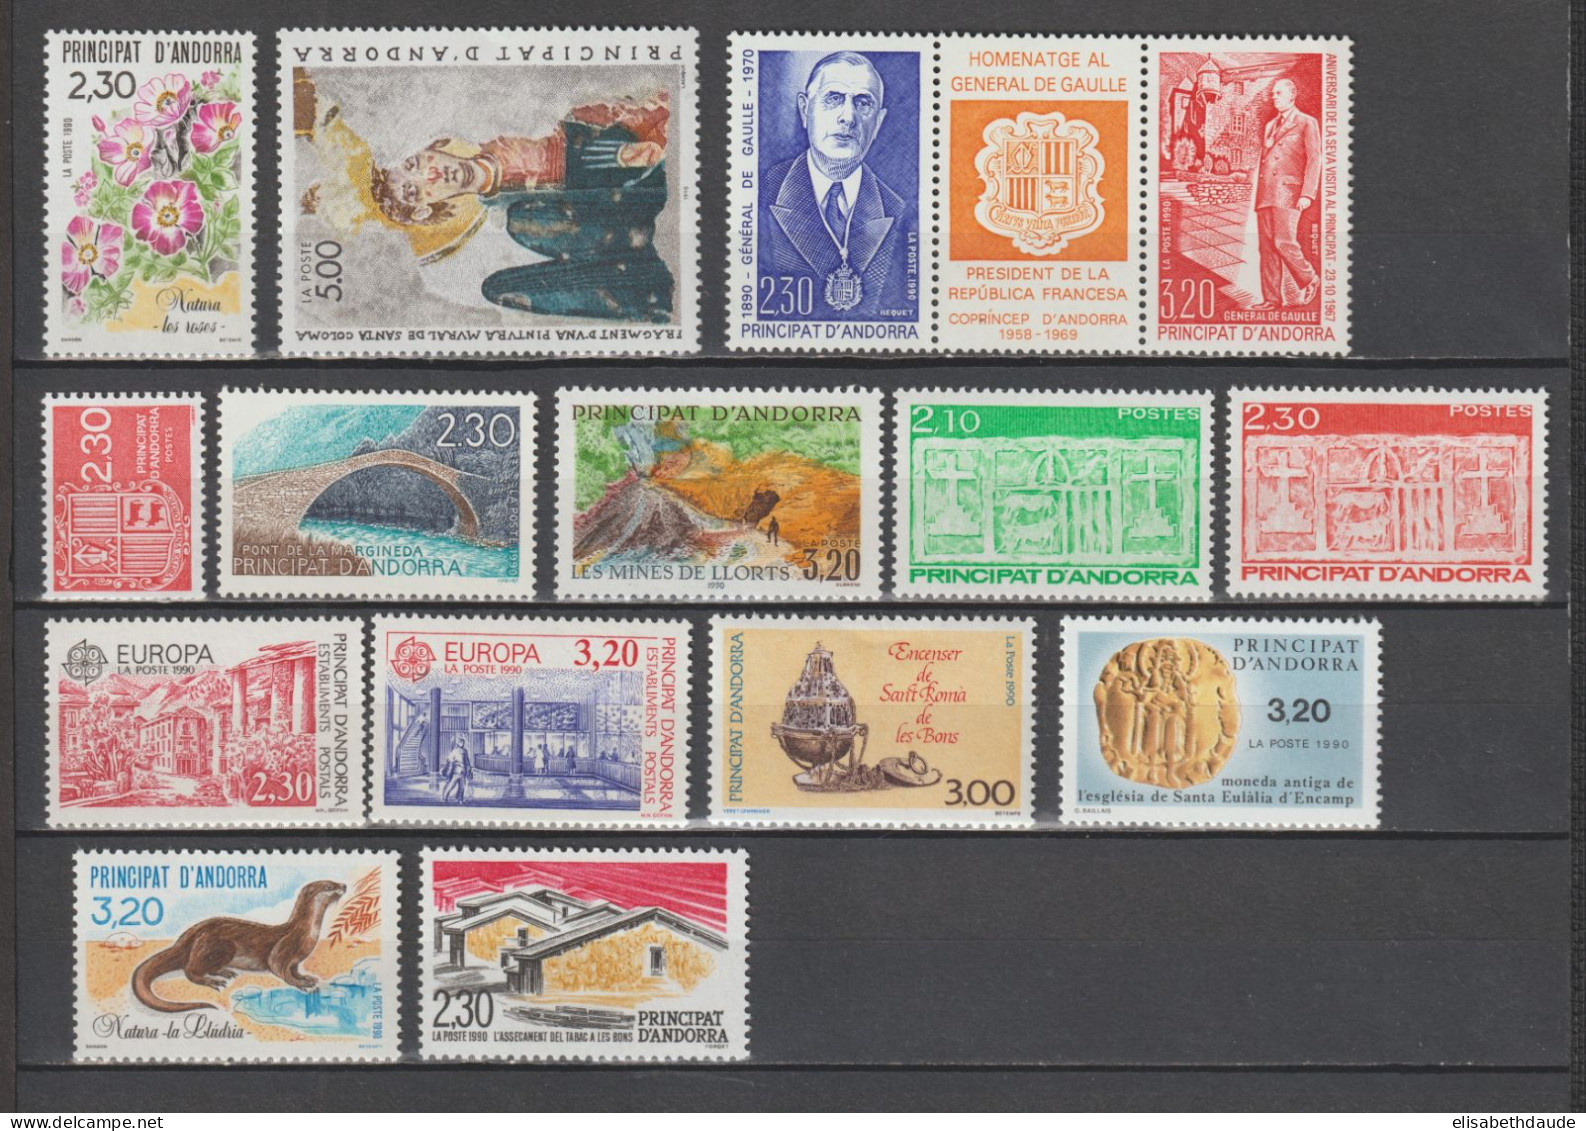 ANDORRE - ANNEE COMPLETE 1990 YVERT N°385/399A ** MNH - COTE 2017 = 39.8 EUR. - - Años Completos